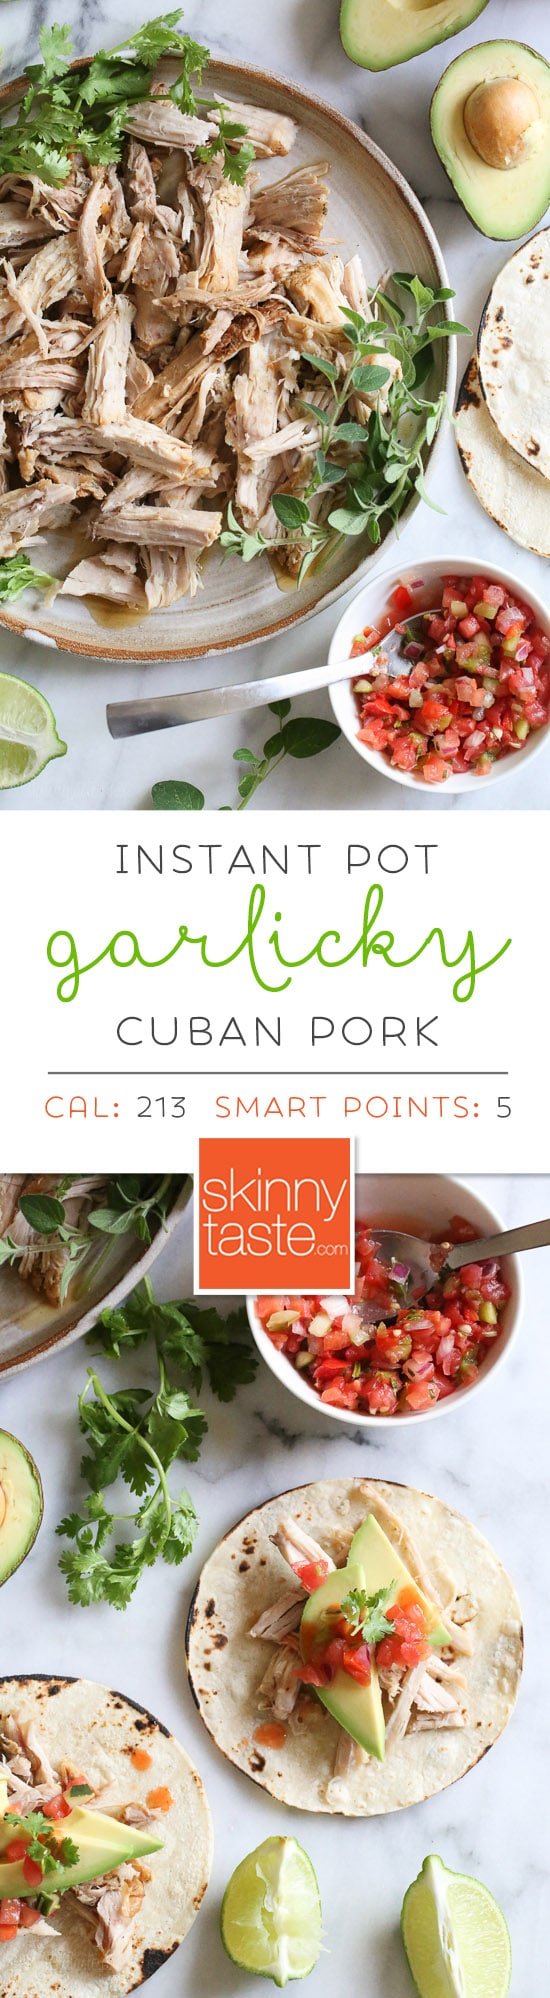 Tender shredded pork, marinated in garlic, cumin, grapefruit and lime and cooked in the pressure cooker is perfect to serve over a bed of rice, cauliflower rice or with tortillas and salsa and avocados for taco night. #instantpot #pressurecooker #shreddedpork #shreddedporkrecipe #easyporktaco